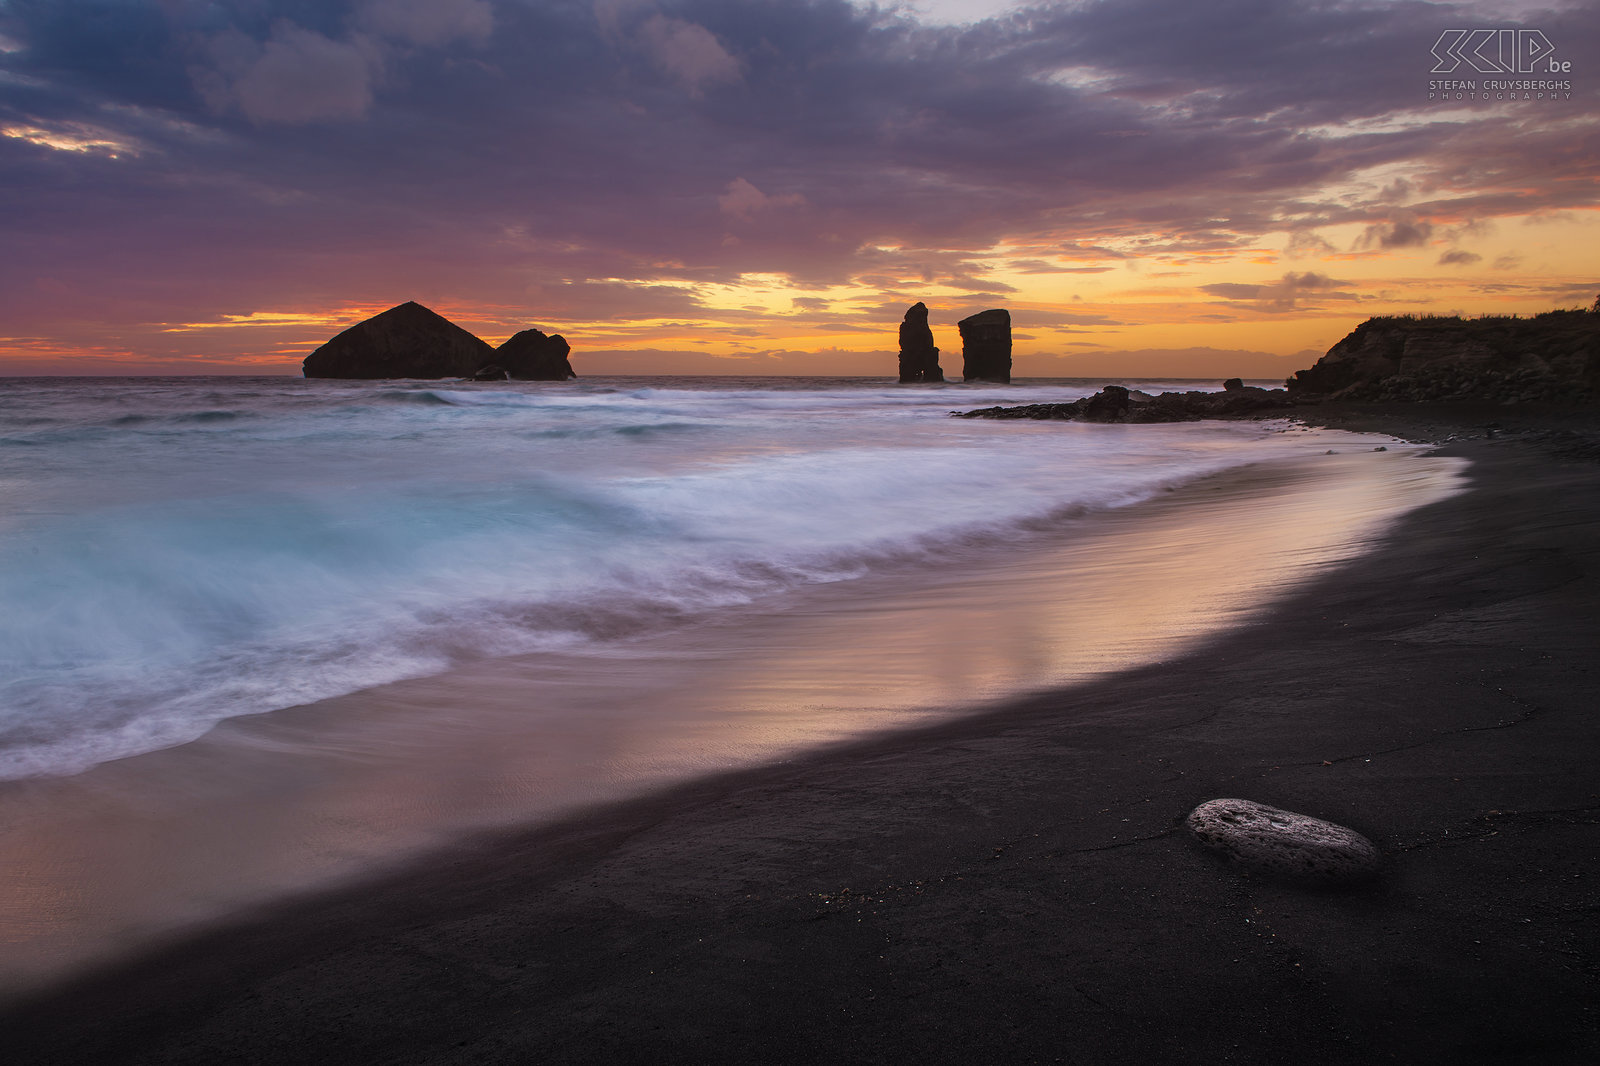 Sunset Mosteiros A beautiful and colorful sunset at the black sandy beach of Mosteiros at the west coast of the island of São Miguel. Stefan Cruysberghs